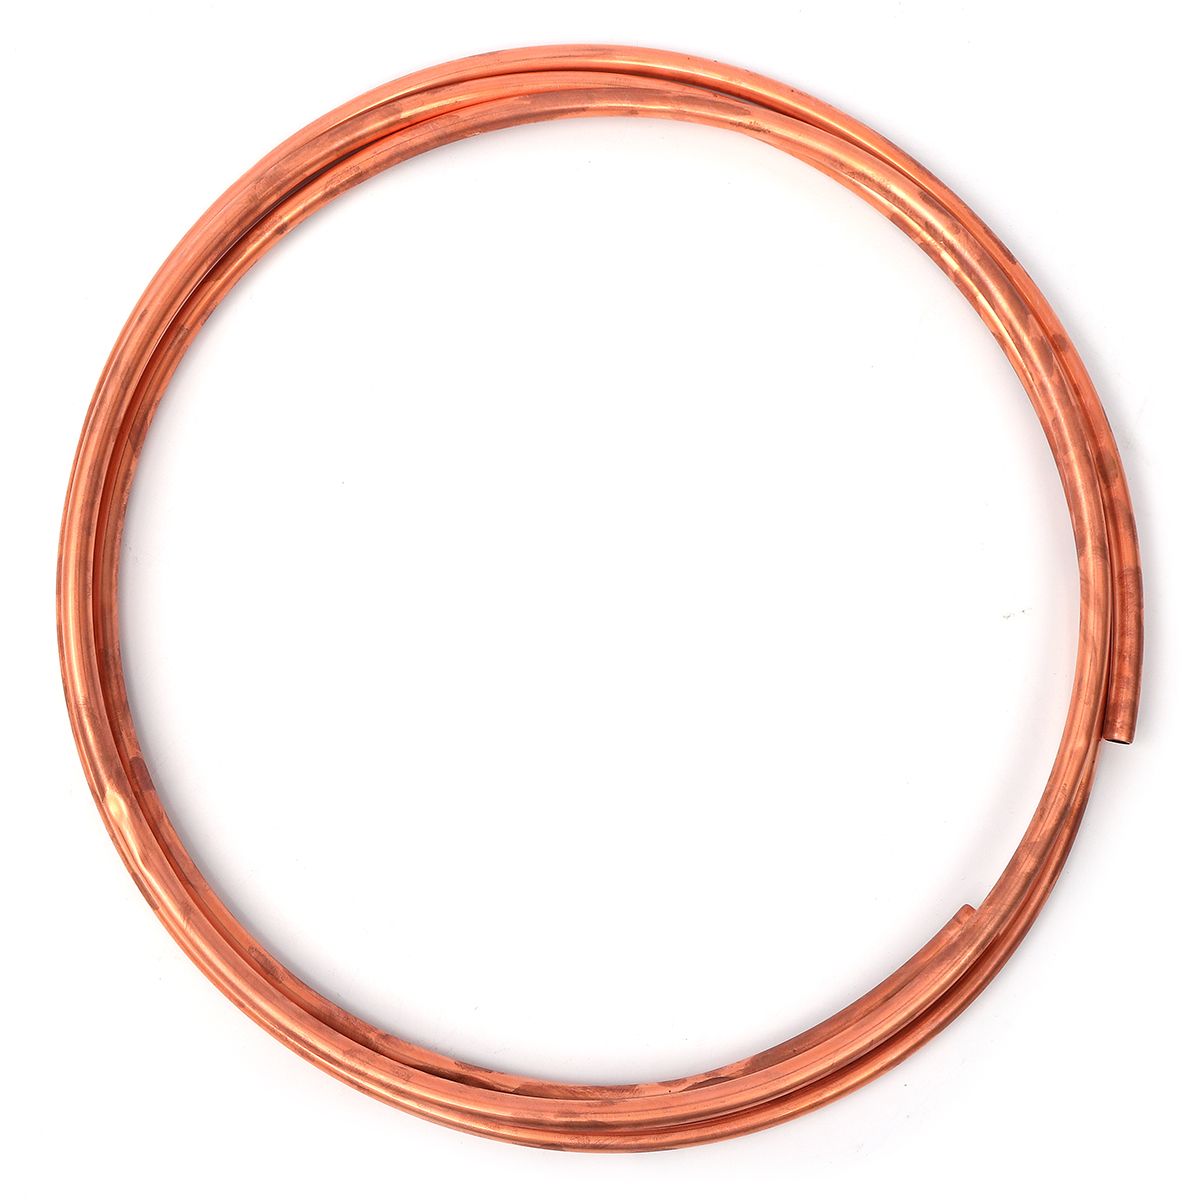 1m2m3m5m-R410A-Air-Conditioning-Soft-Copper-Tube-Pipe-Coil-Brass-Tube-1407082